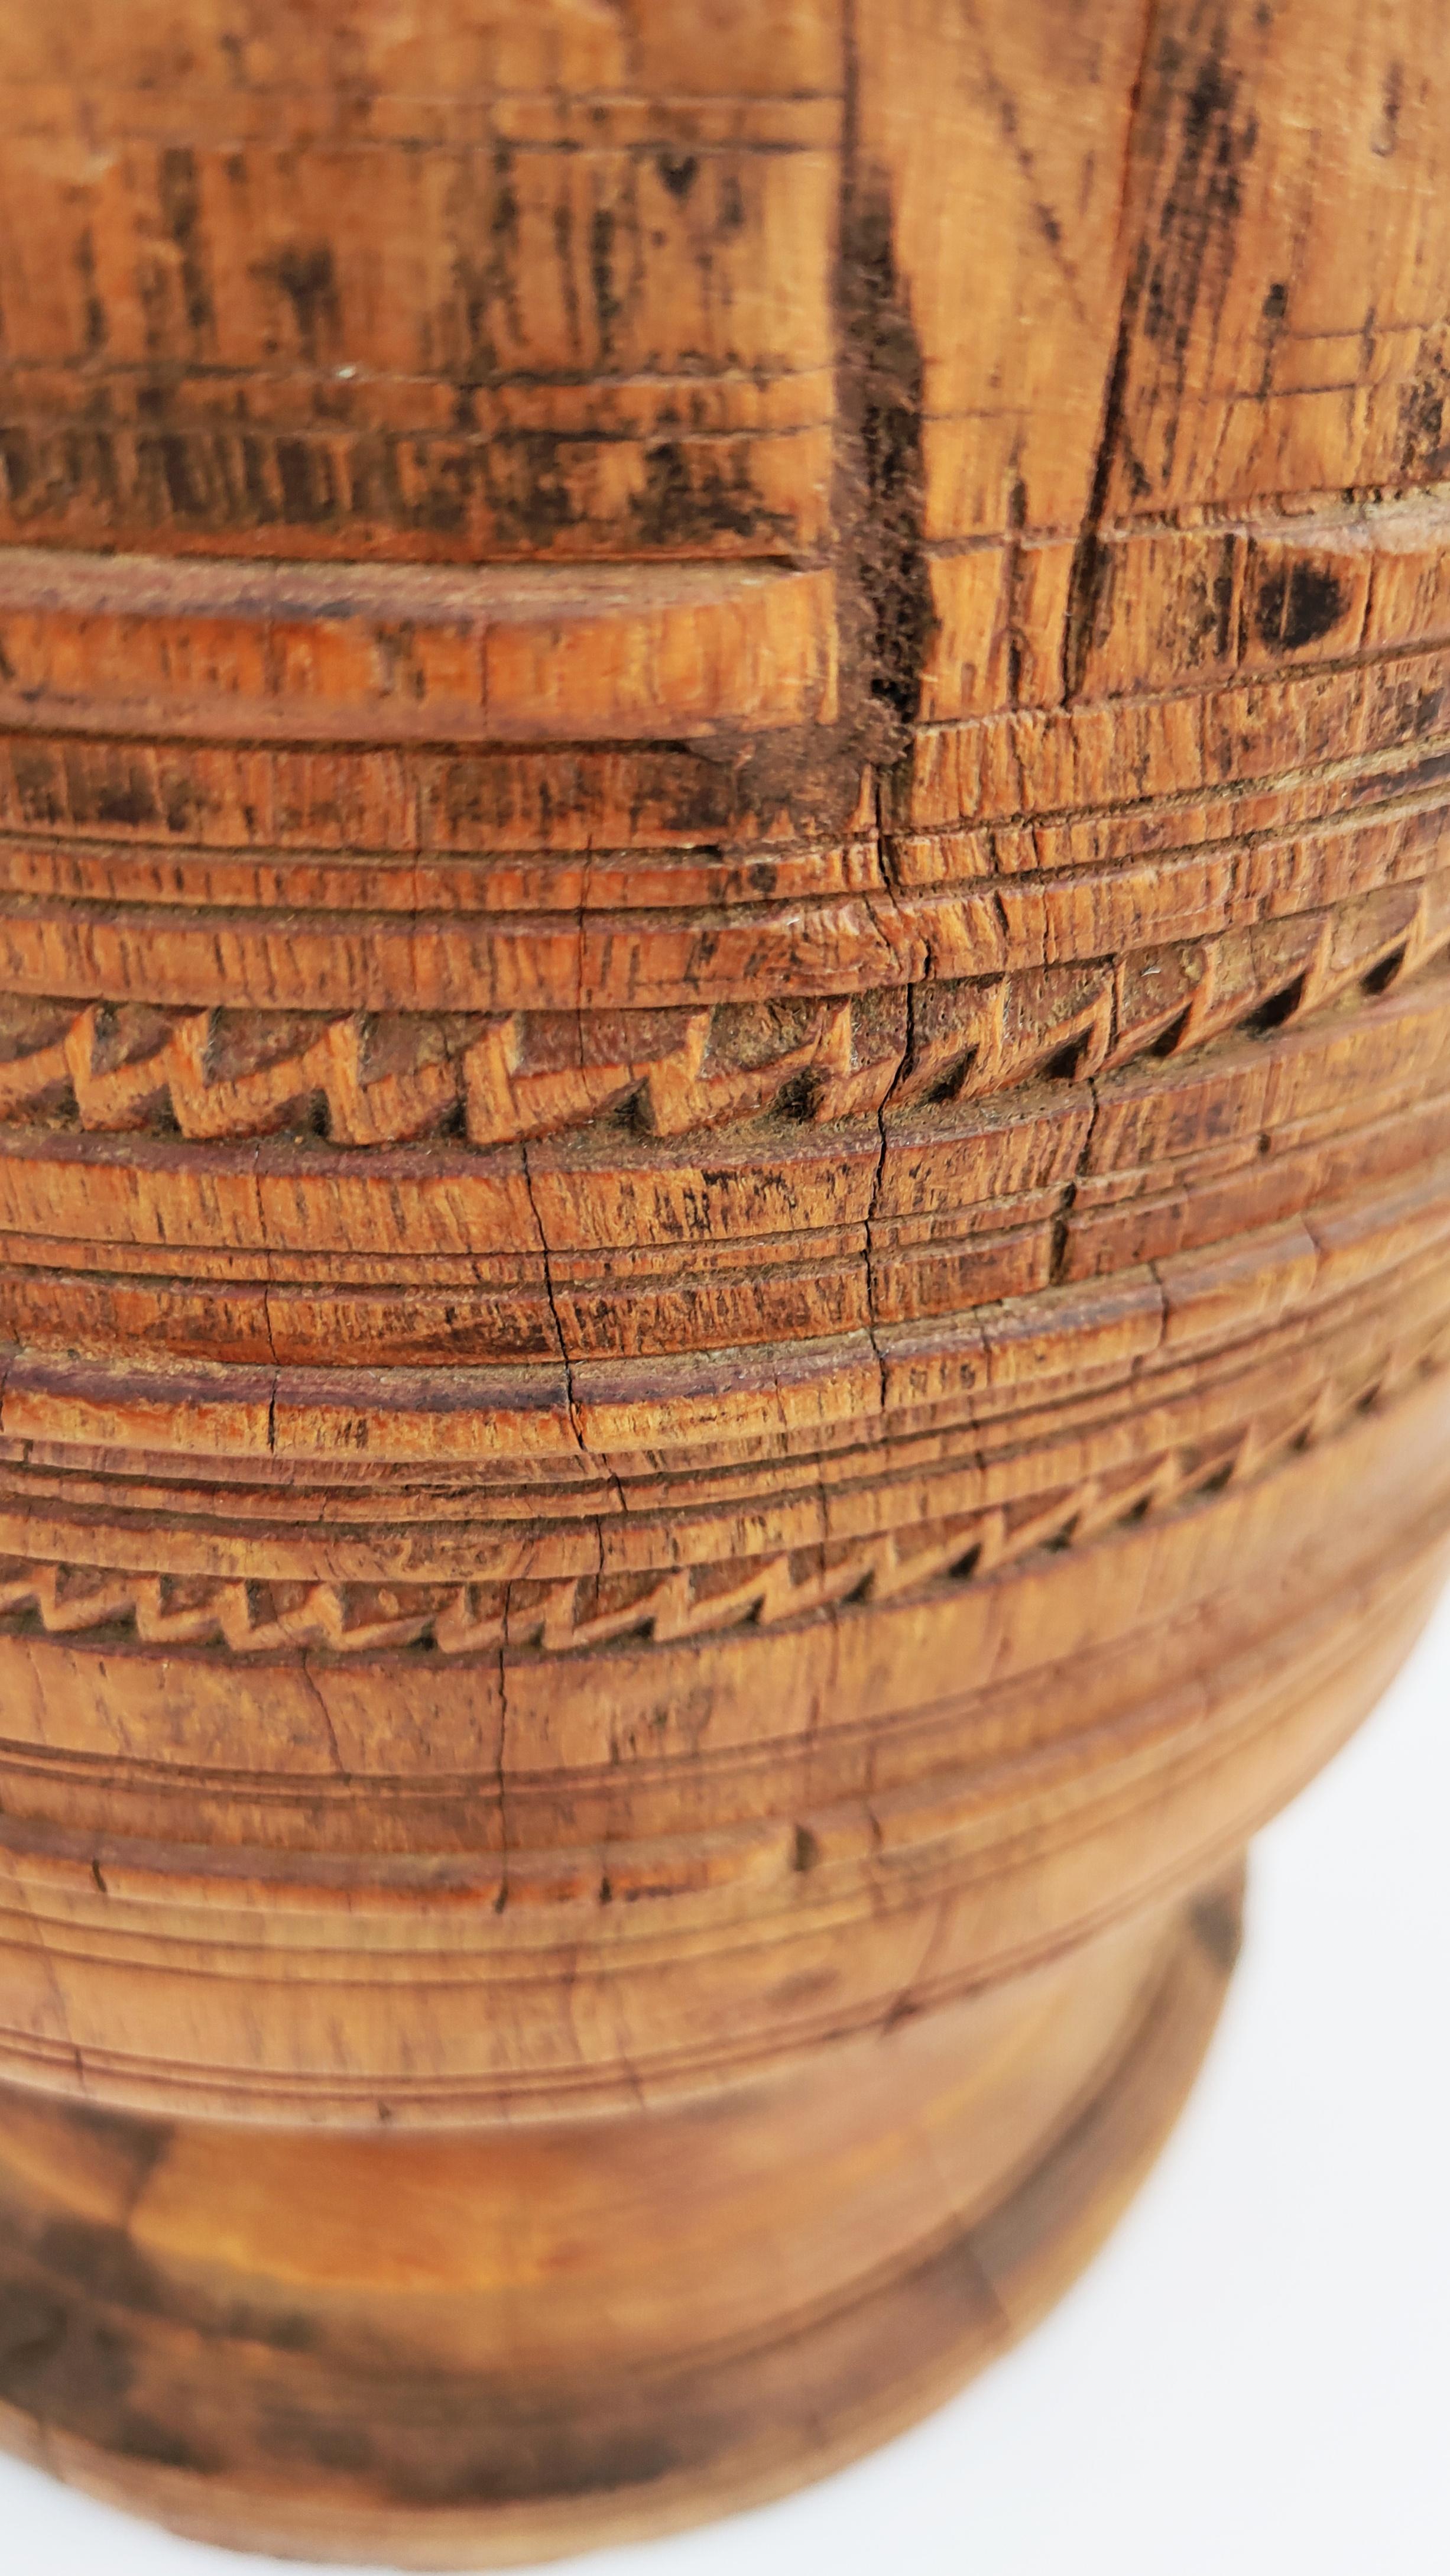 Large Wooden African Mortar Bowl, 1950s For Sale 2